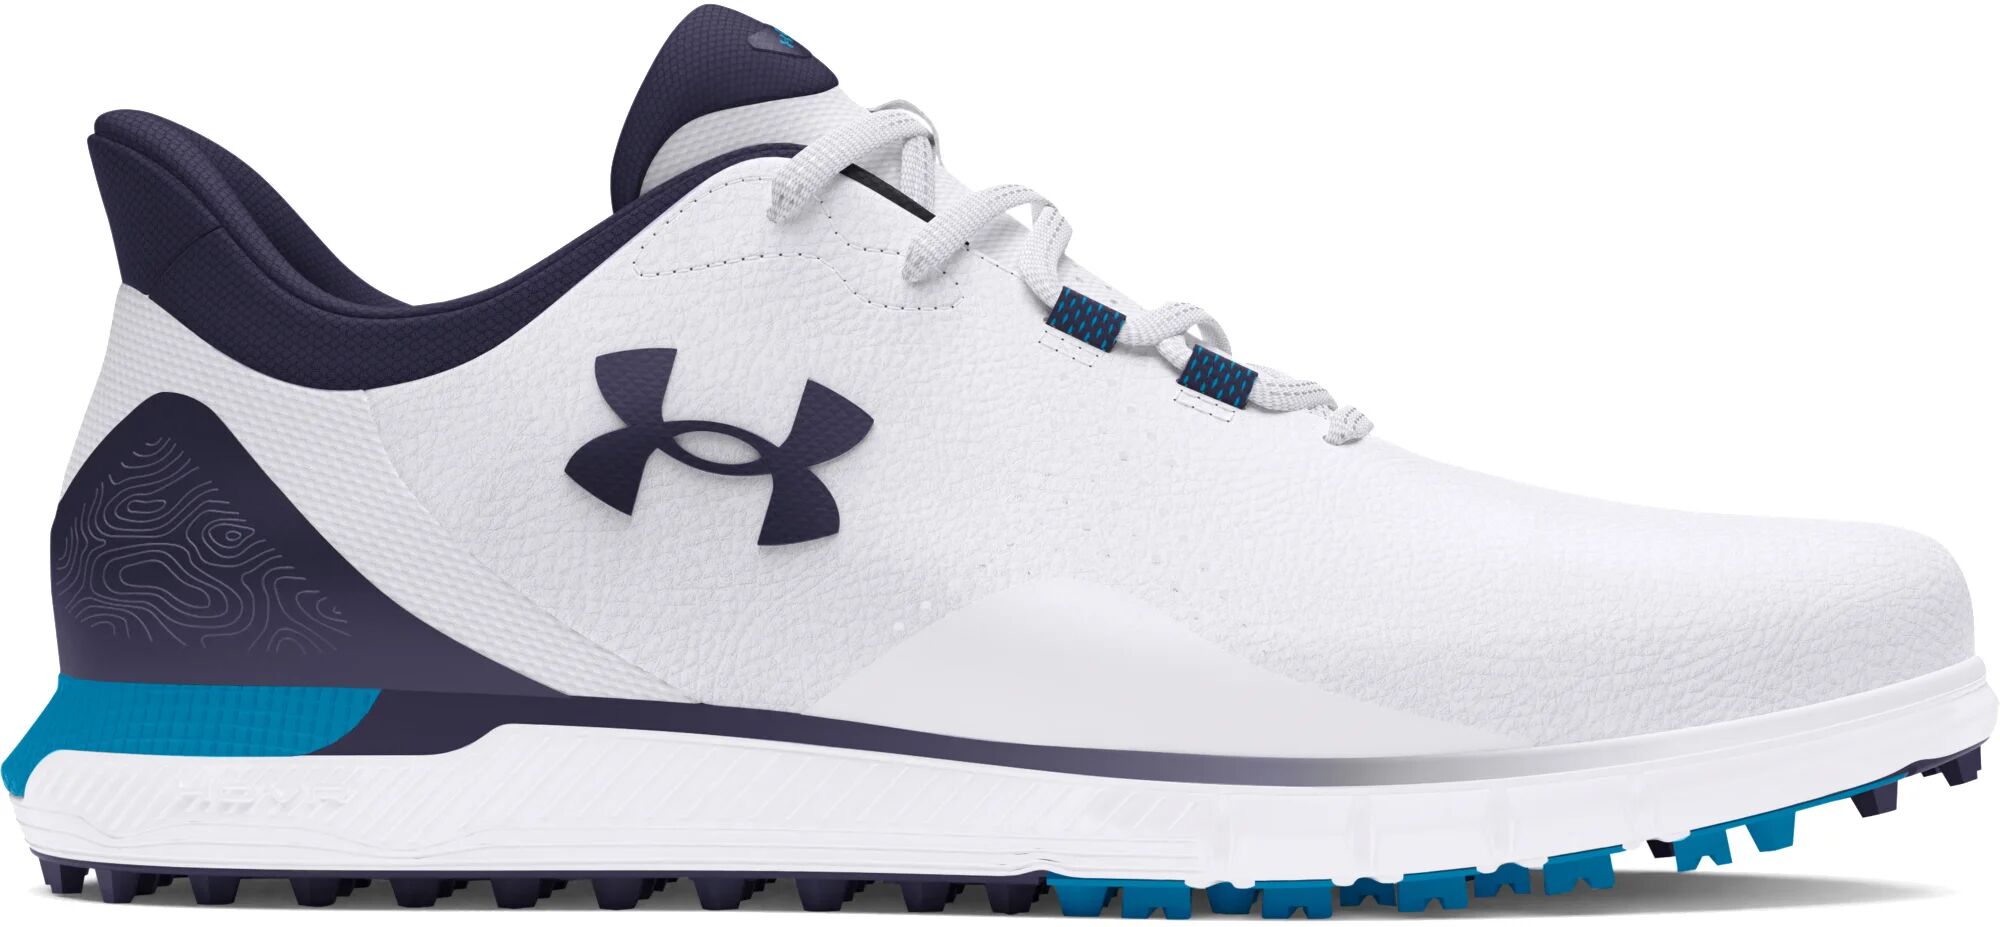 Under Armour UA HOVR Drive Fade Spikeless Golf Shoes 2024 - White/Capri/Midnight Navy - 7.5 - WIDE